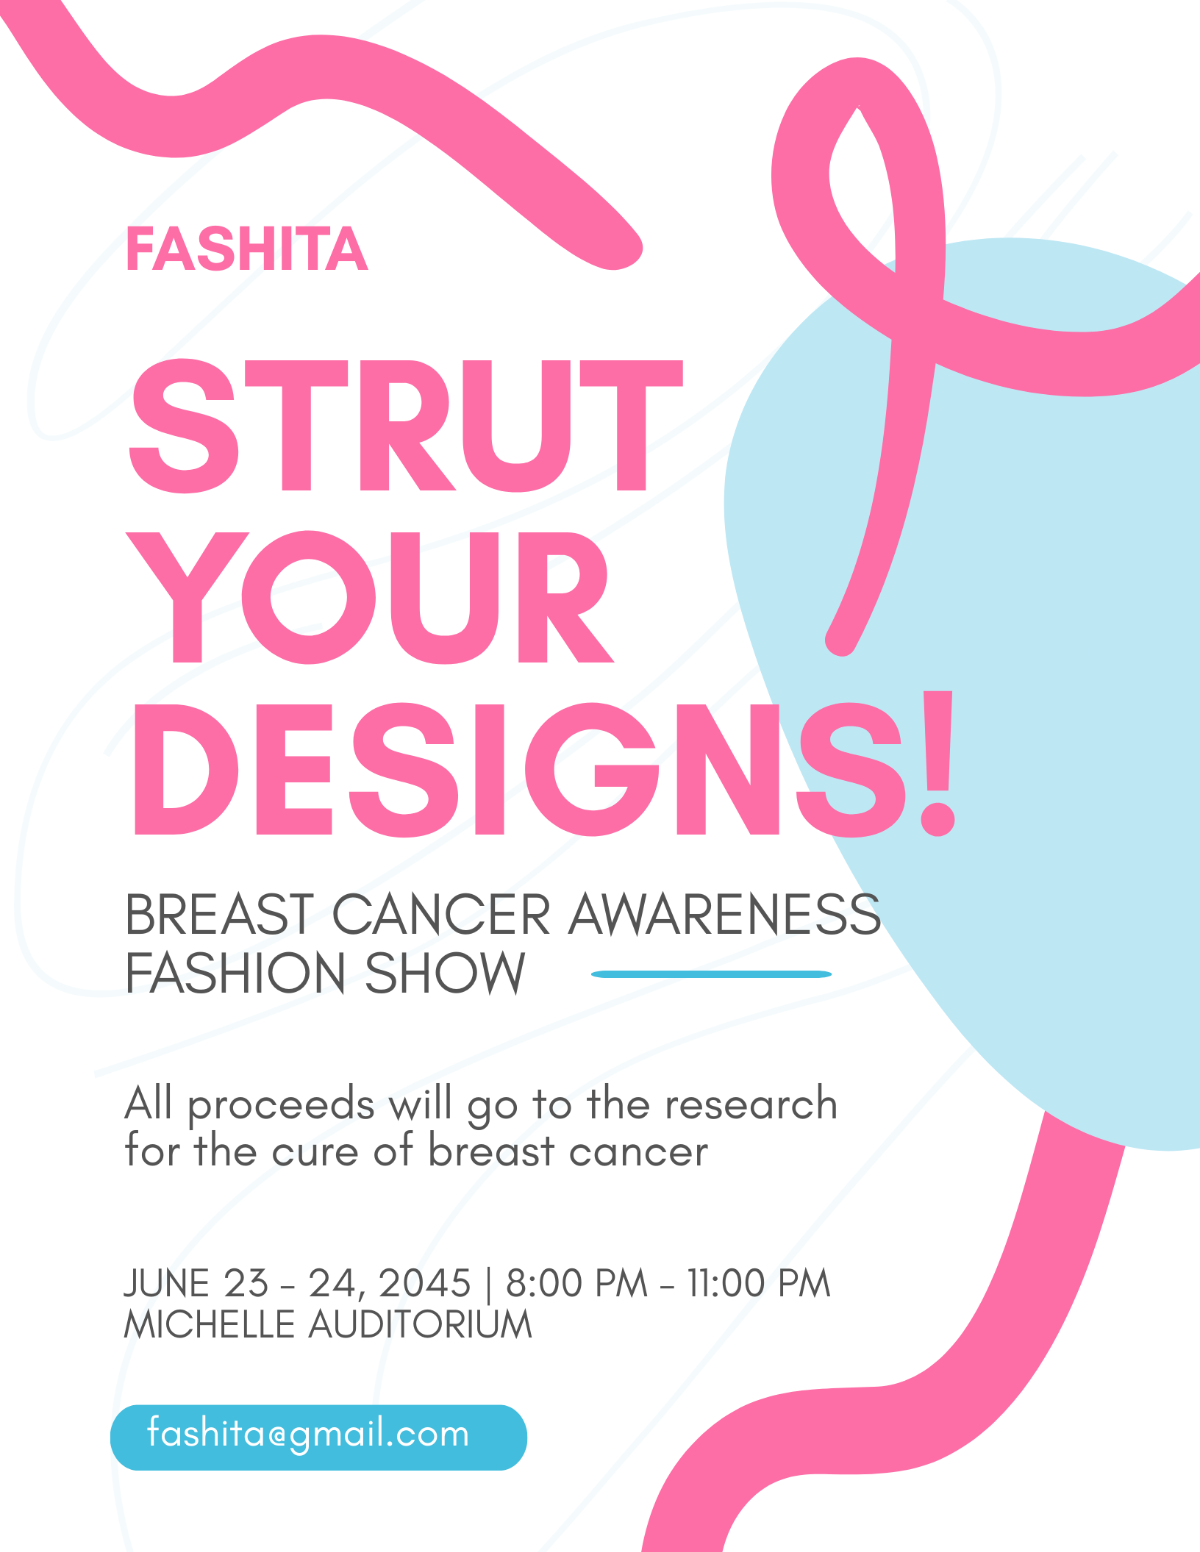 Breast Cancer Benefit Flyer Template